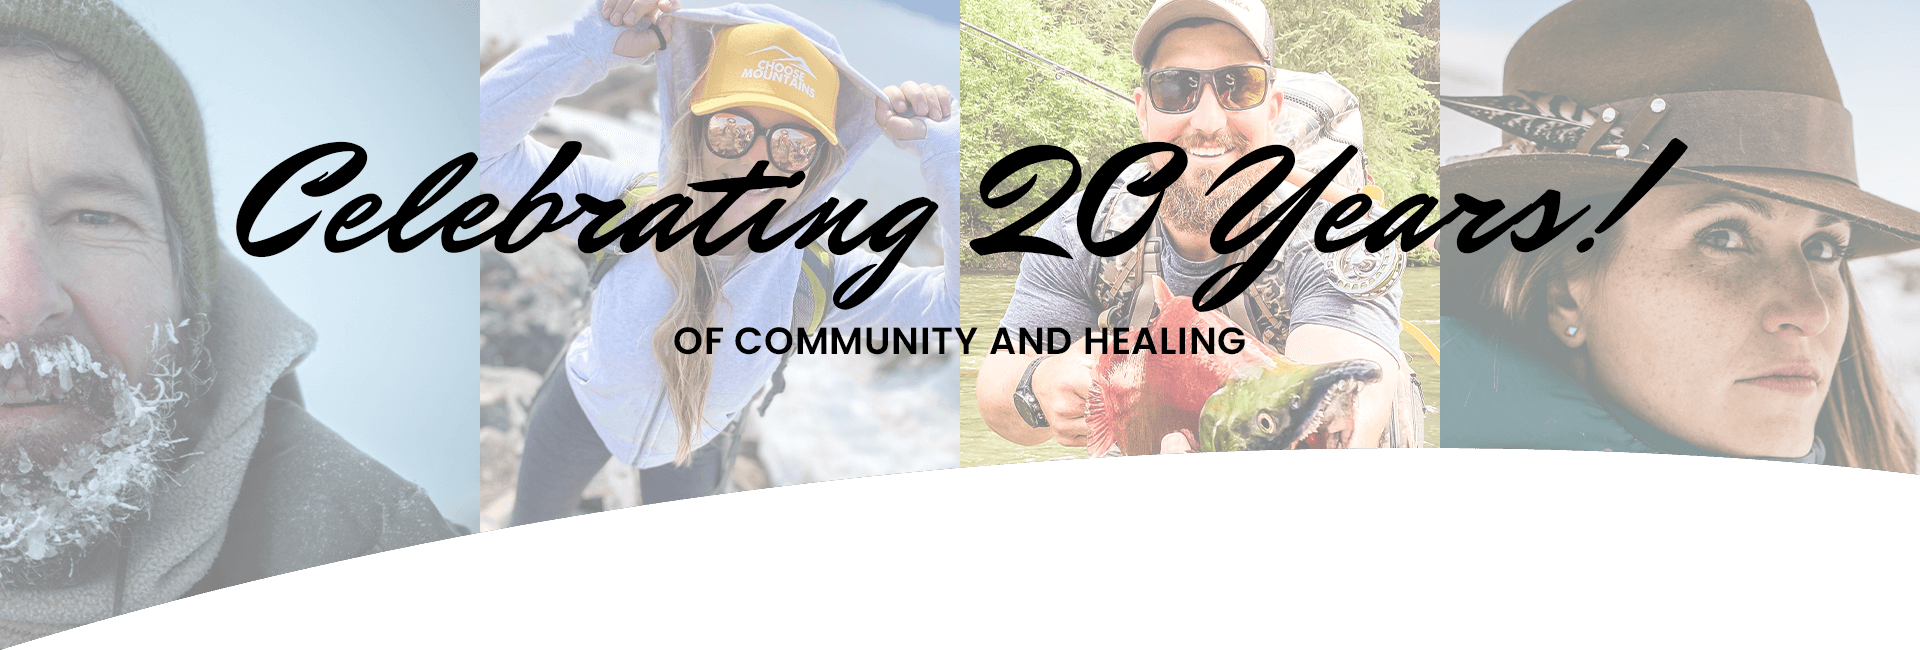 Celebrating 20 Years of Community and Healing